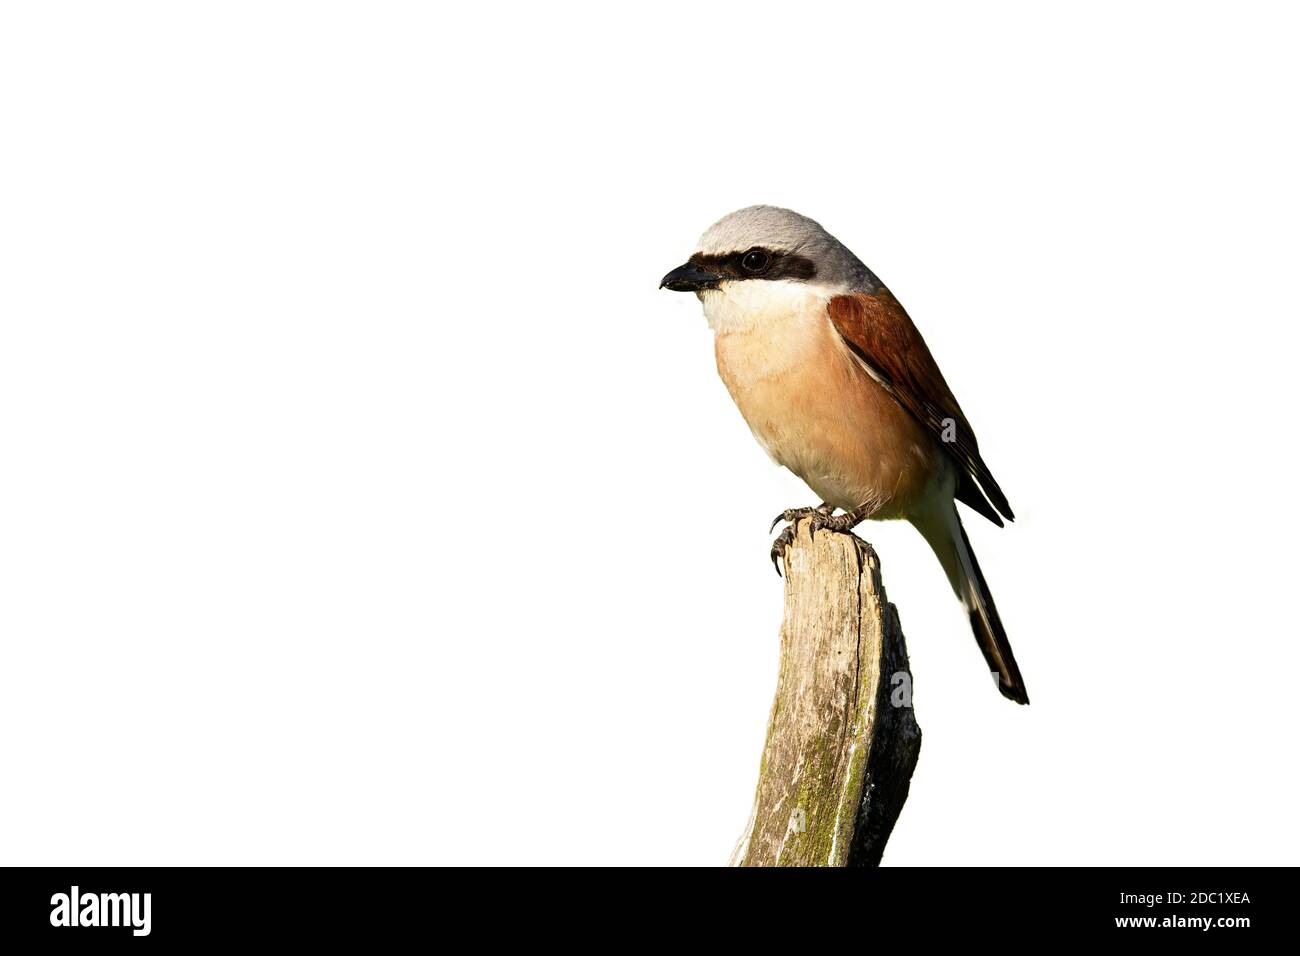 Little red-backed shrike, lanius collurio, male sitting on branch cut out on blank. Small bird looking on bough isolated on white background. Shrike w Stock Photo